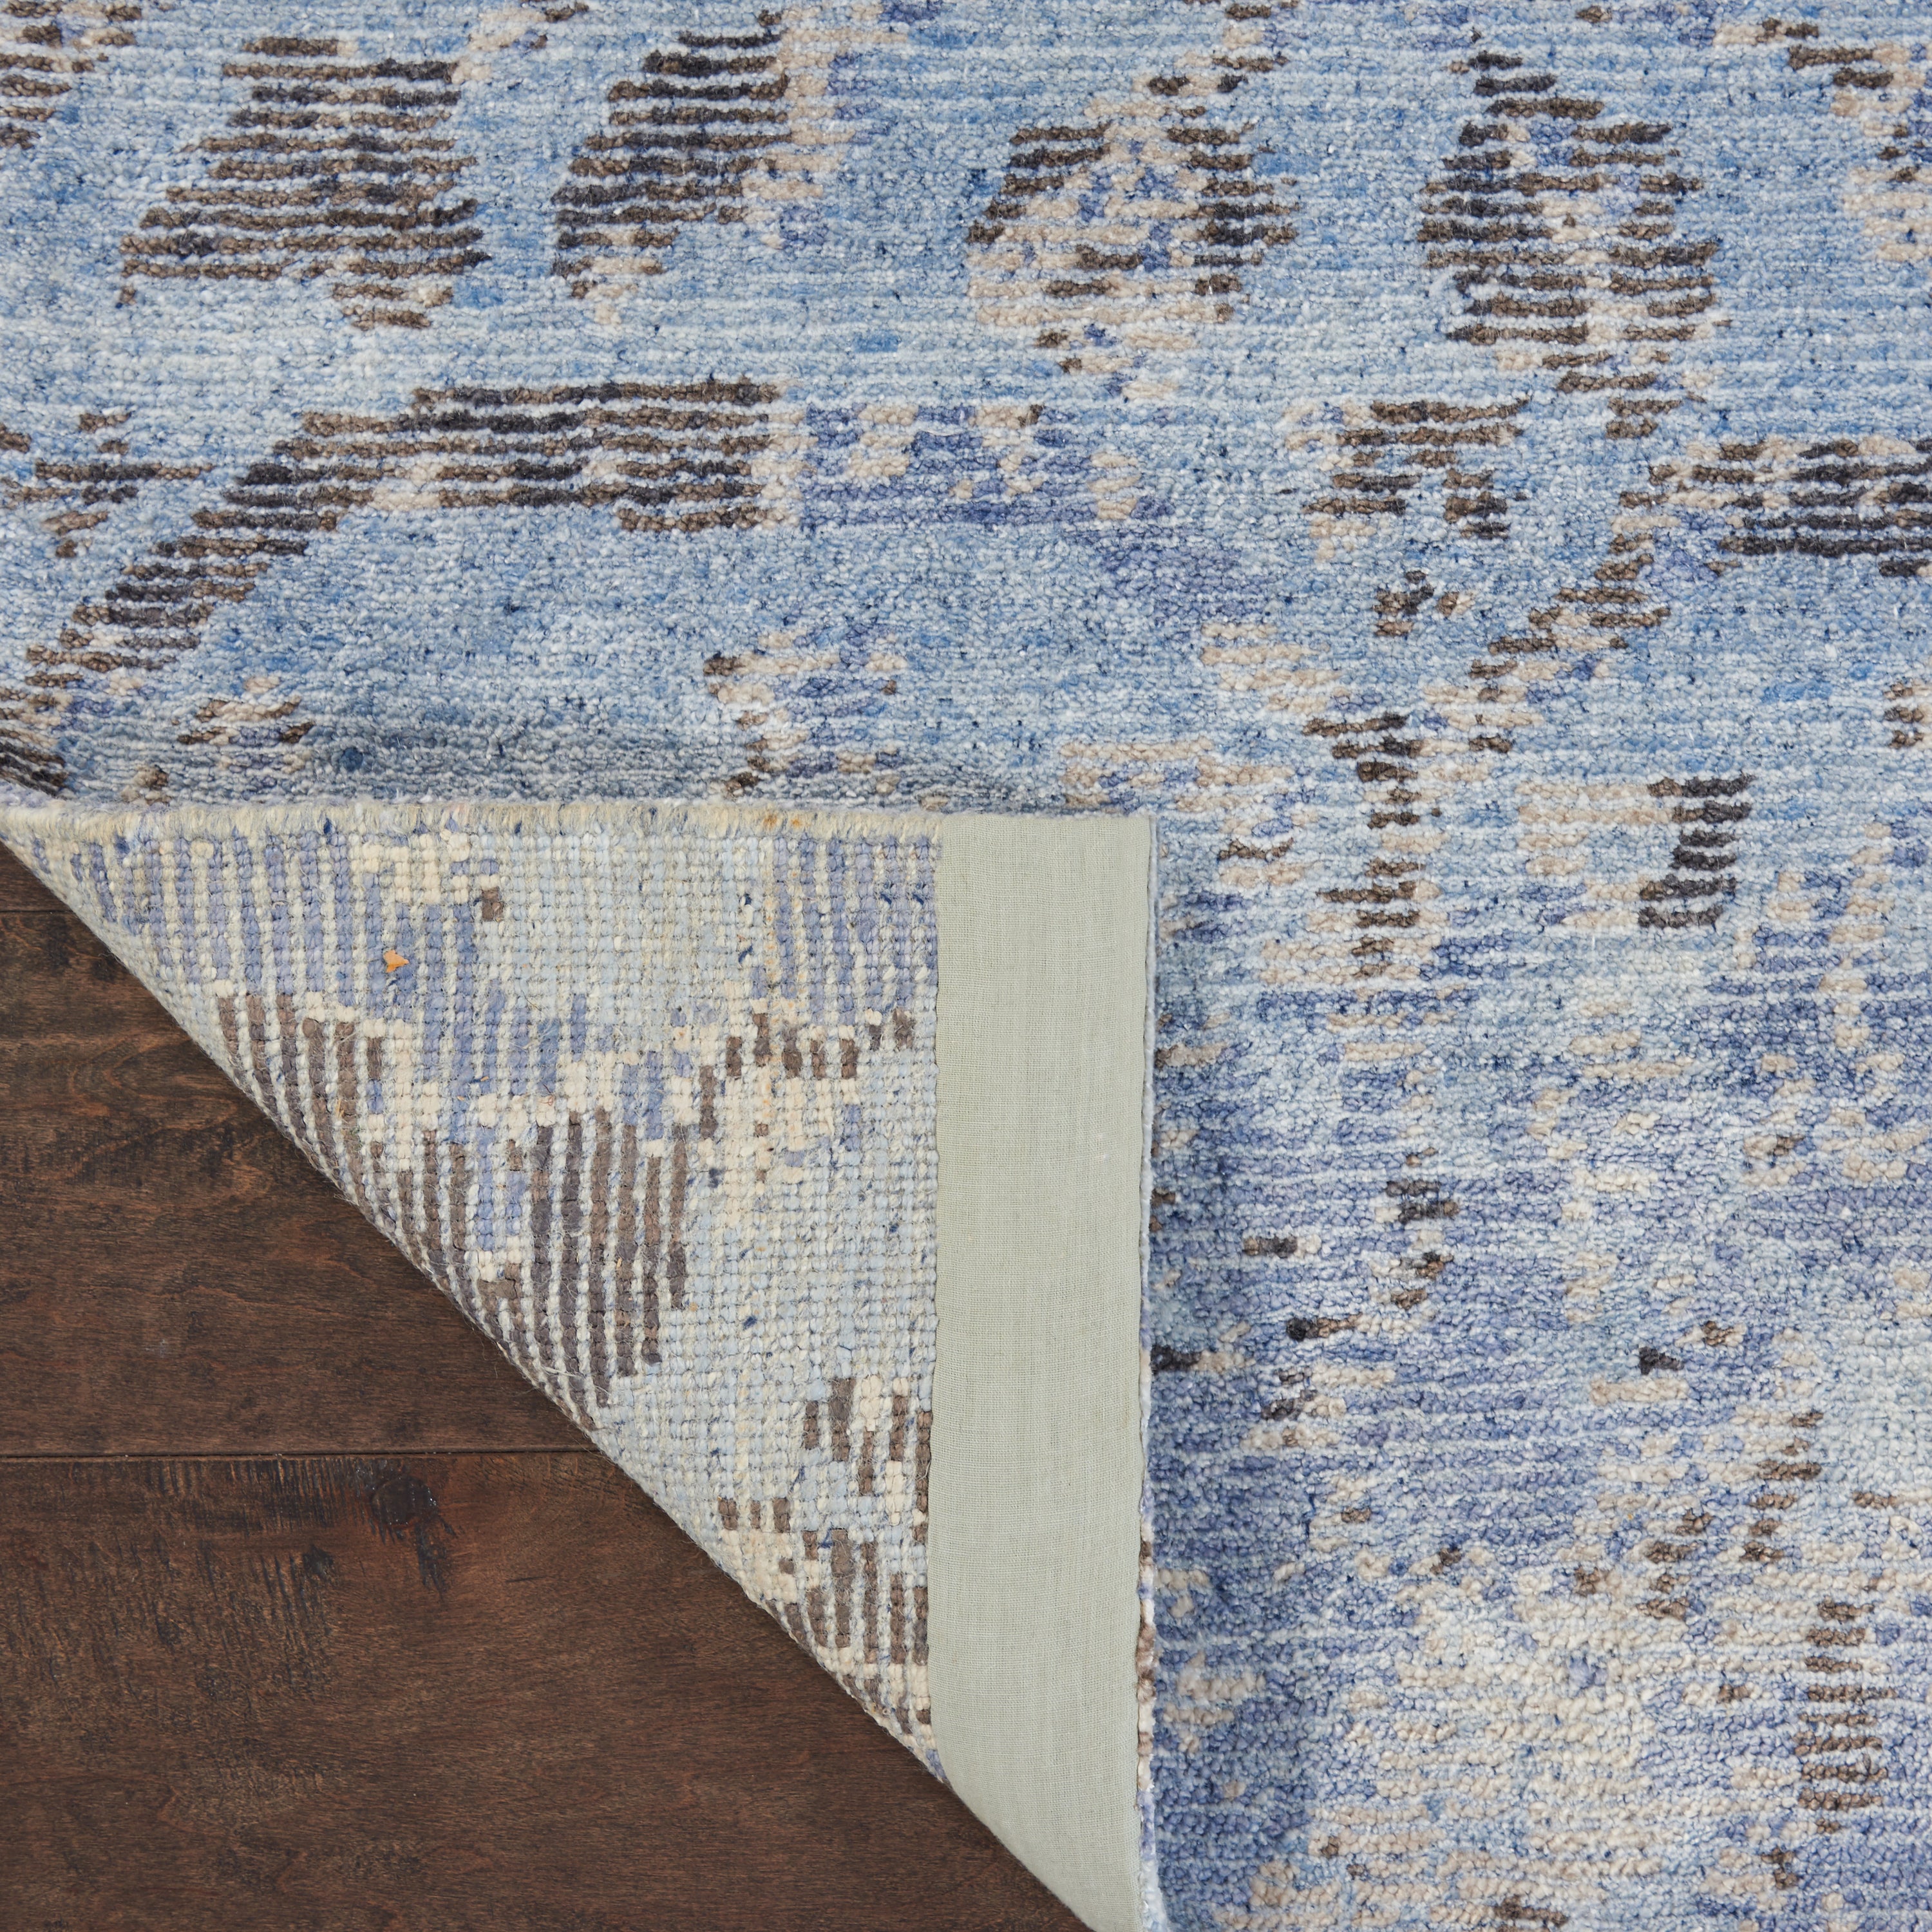 Close-up of a blue textile area rug with abstract pattern.